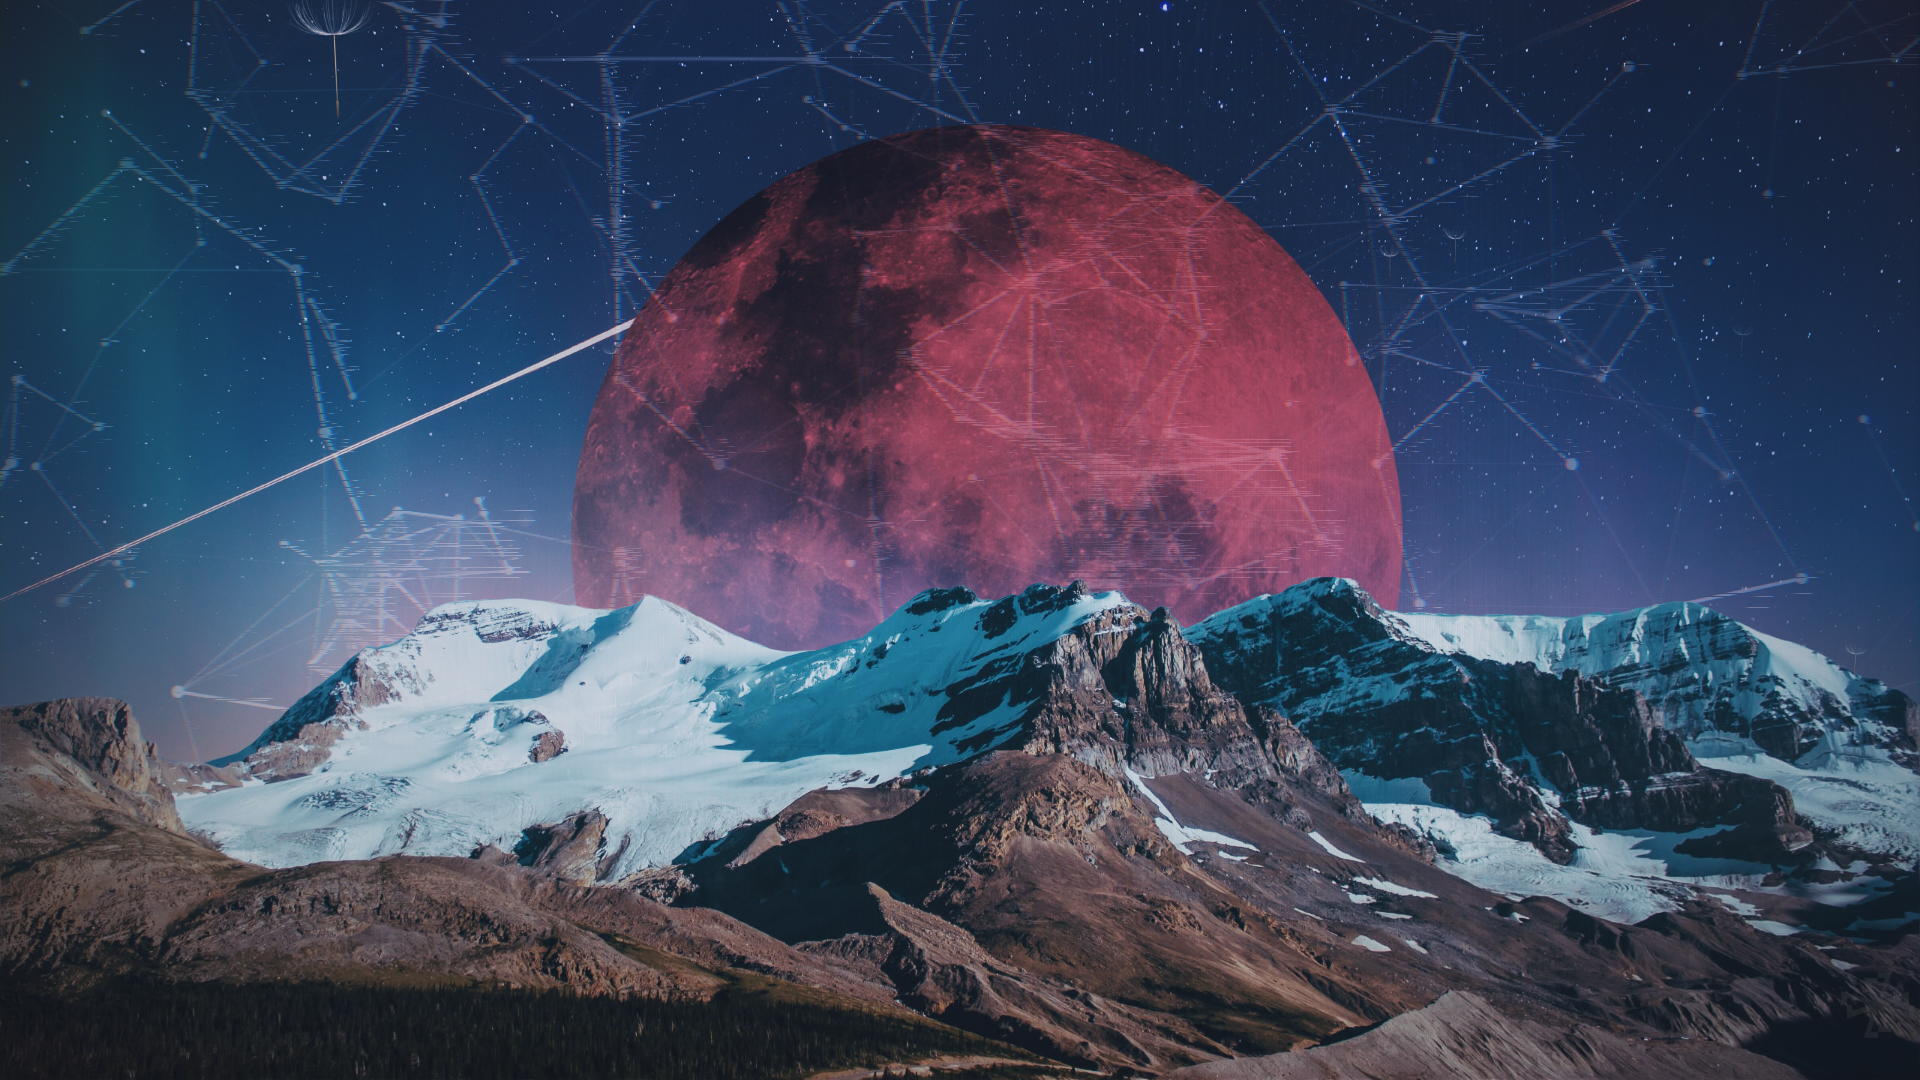 General 1920x1080 space Moon red moon mountains glitch art snow constellations